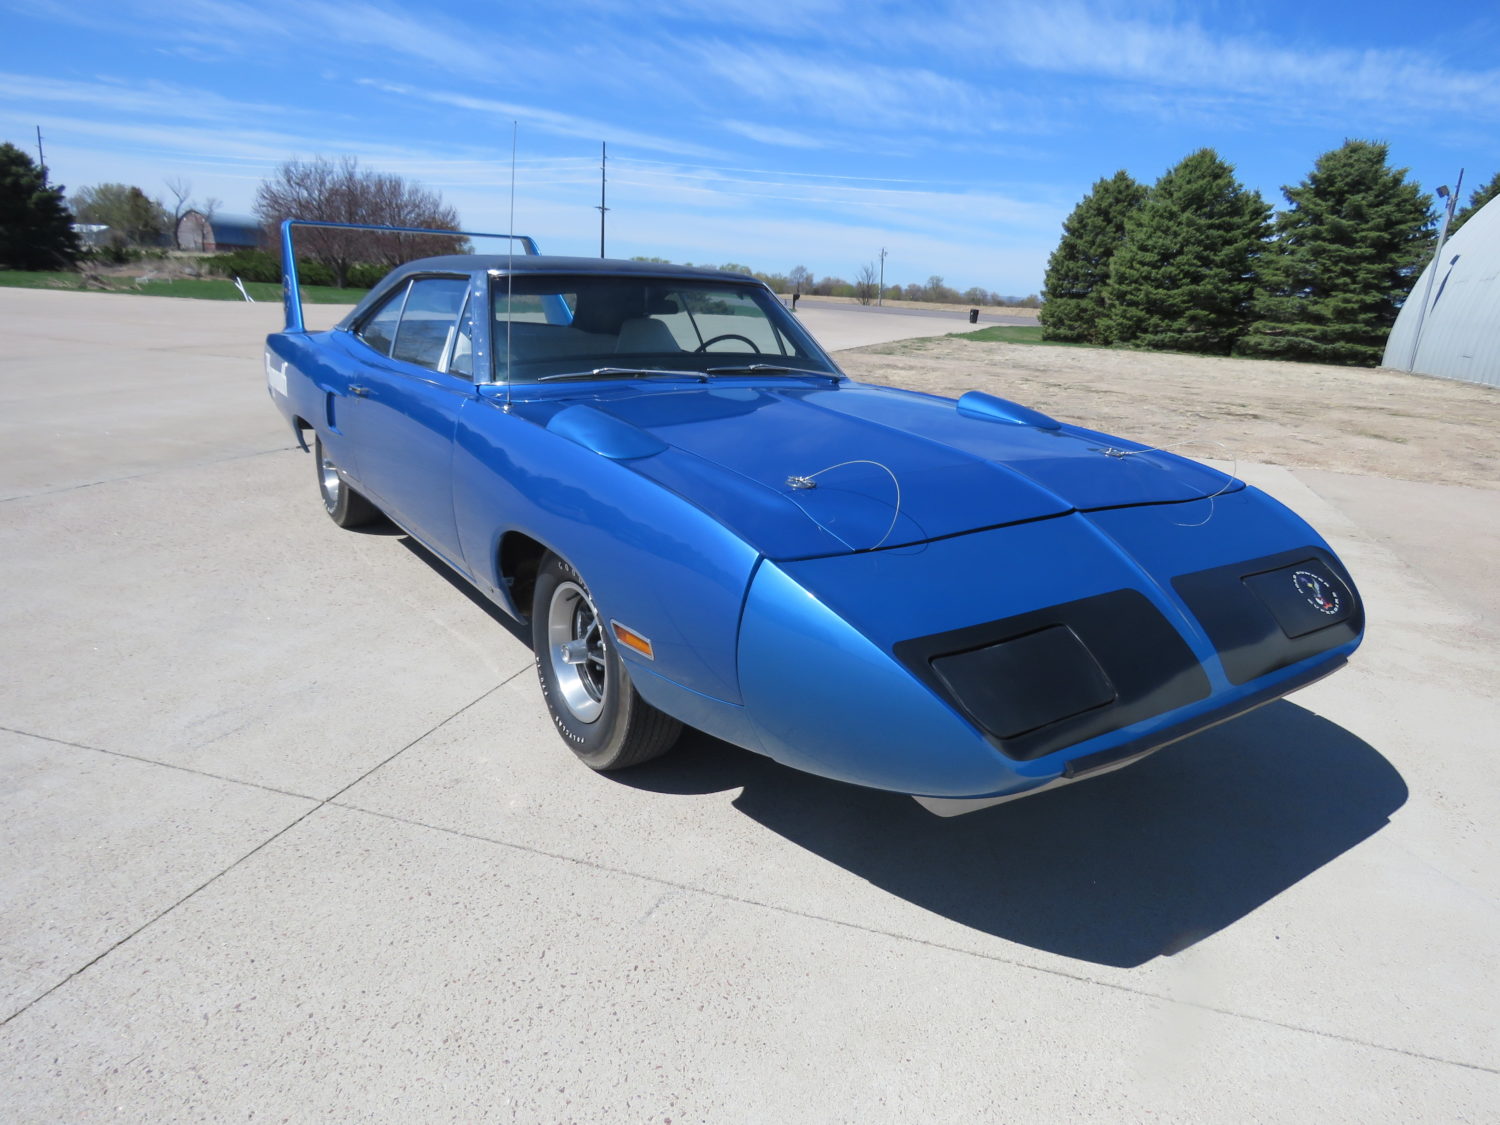 MOPAR Collector Cars- The Jim Gesswein Classic Car Collection Auction- LIVE Onsite Auction with Online Bidding - image 1